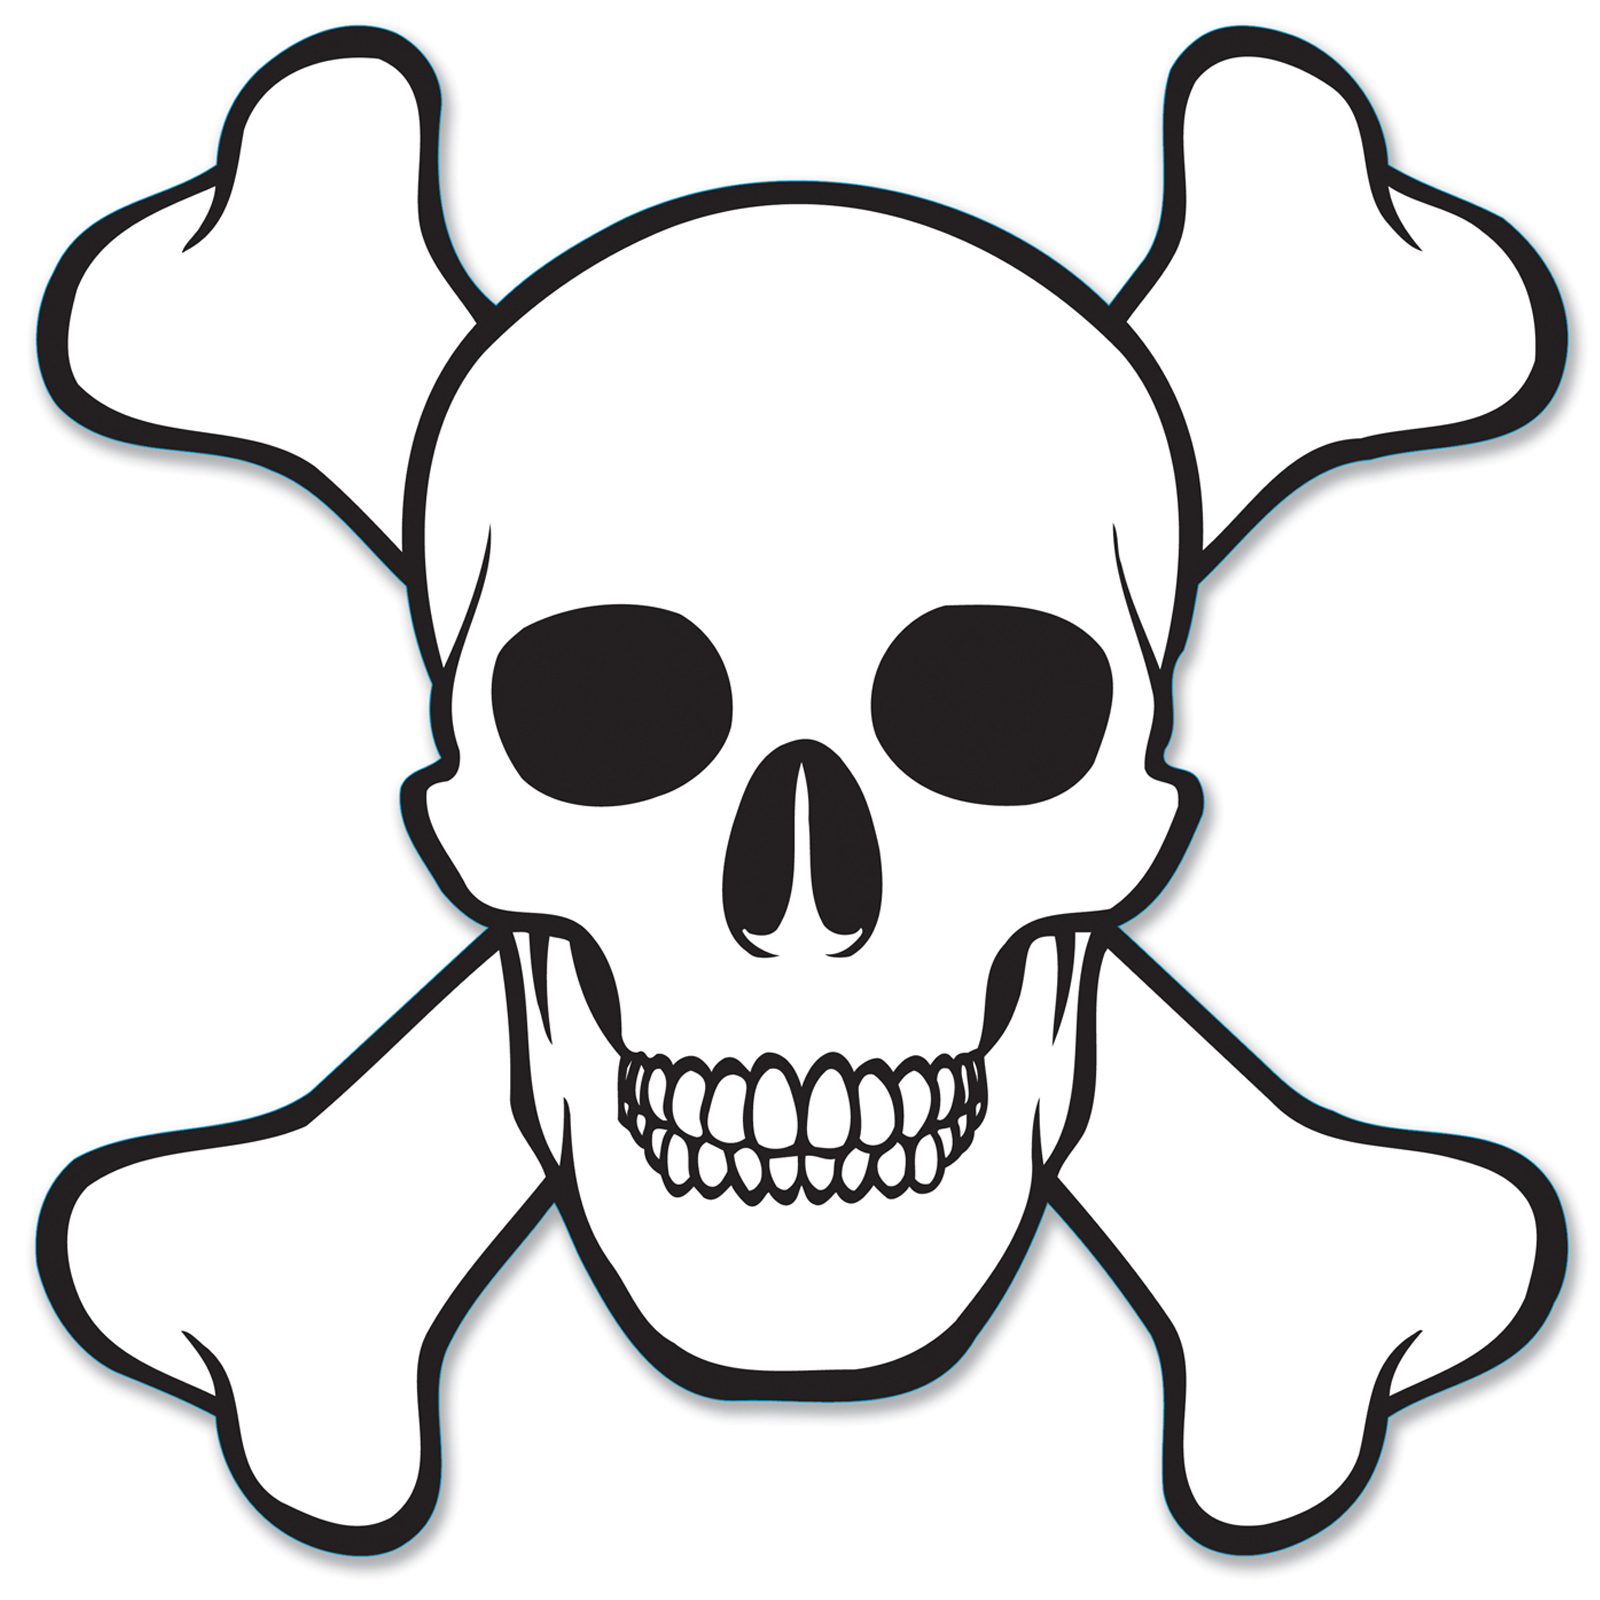  How To Draw A Skull And Crossbones of all time Check it out now 